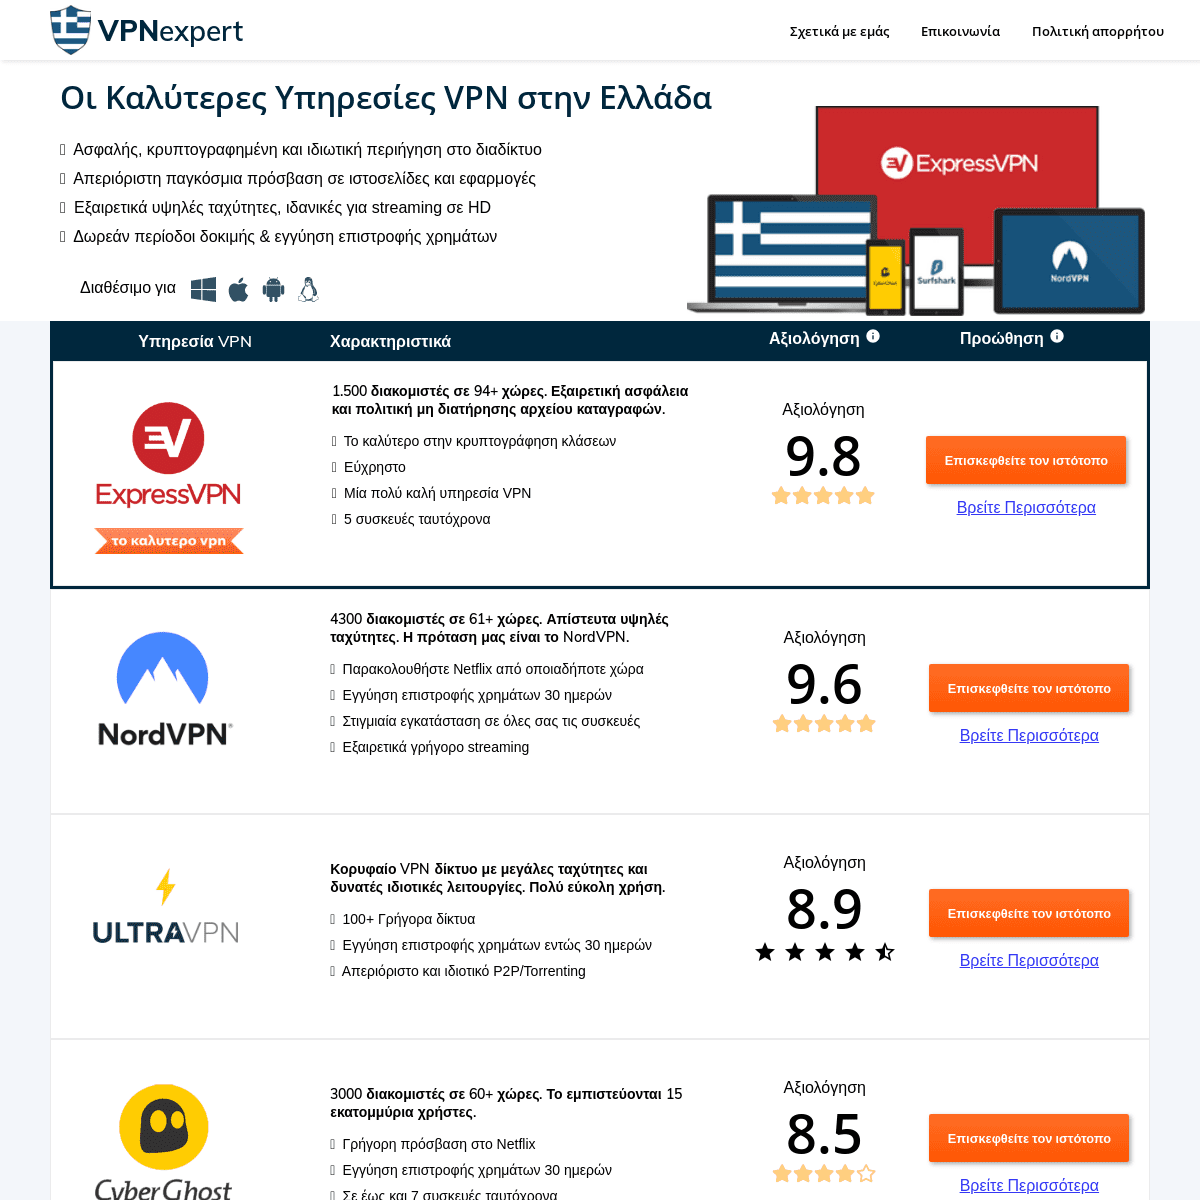 A complete backup of thevpnexpert.com